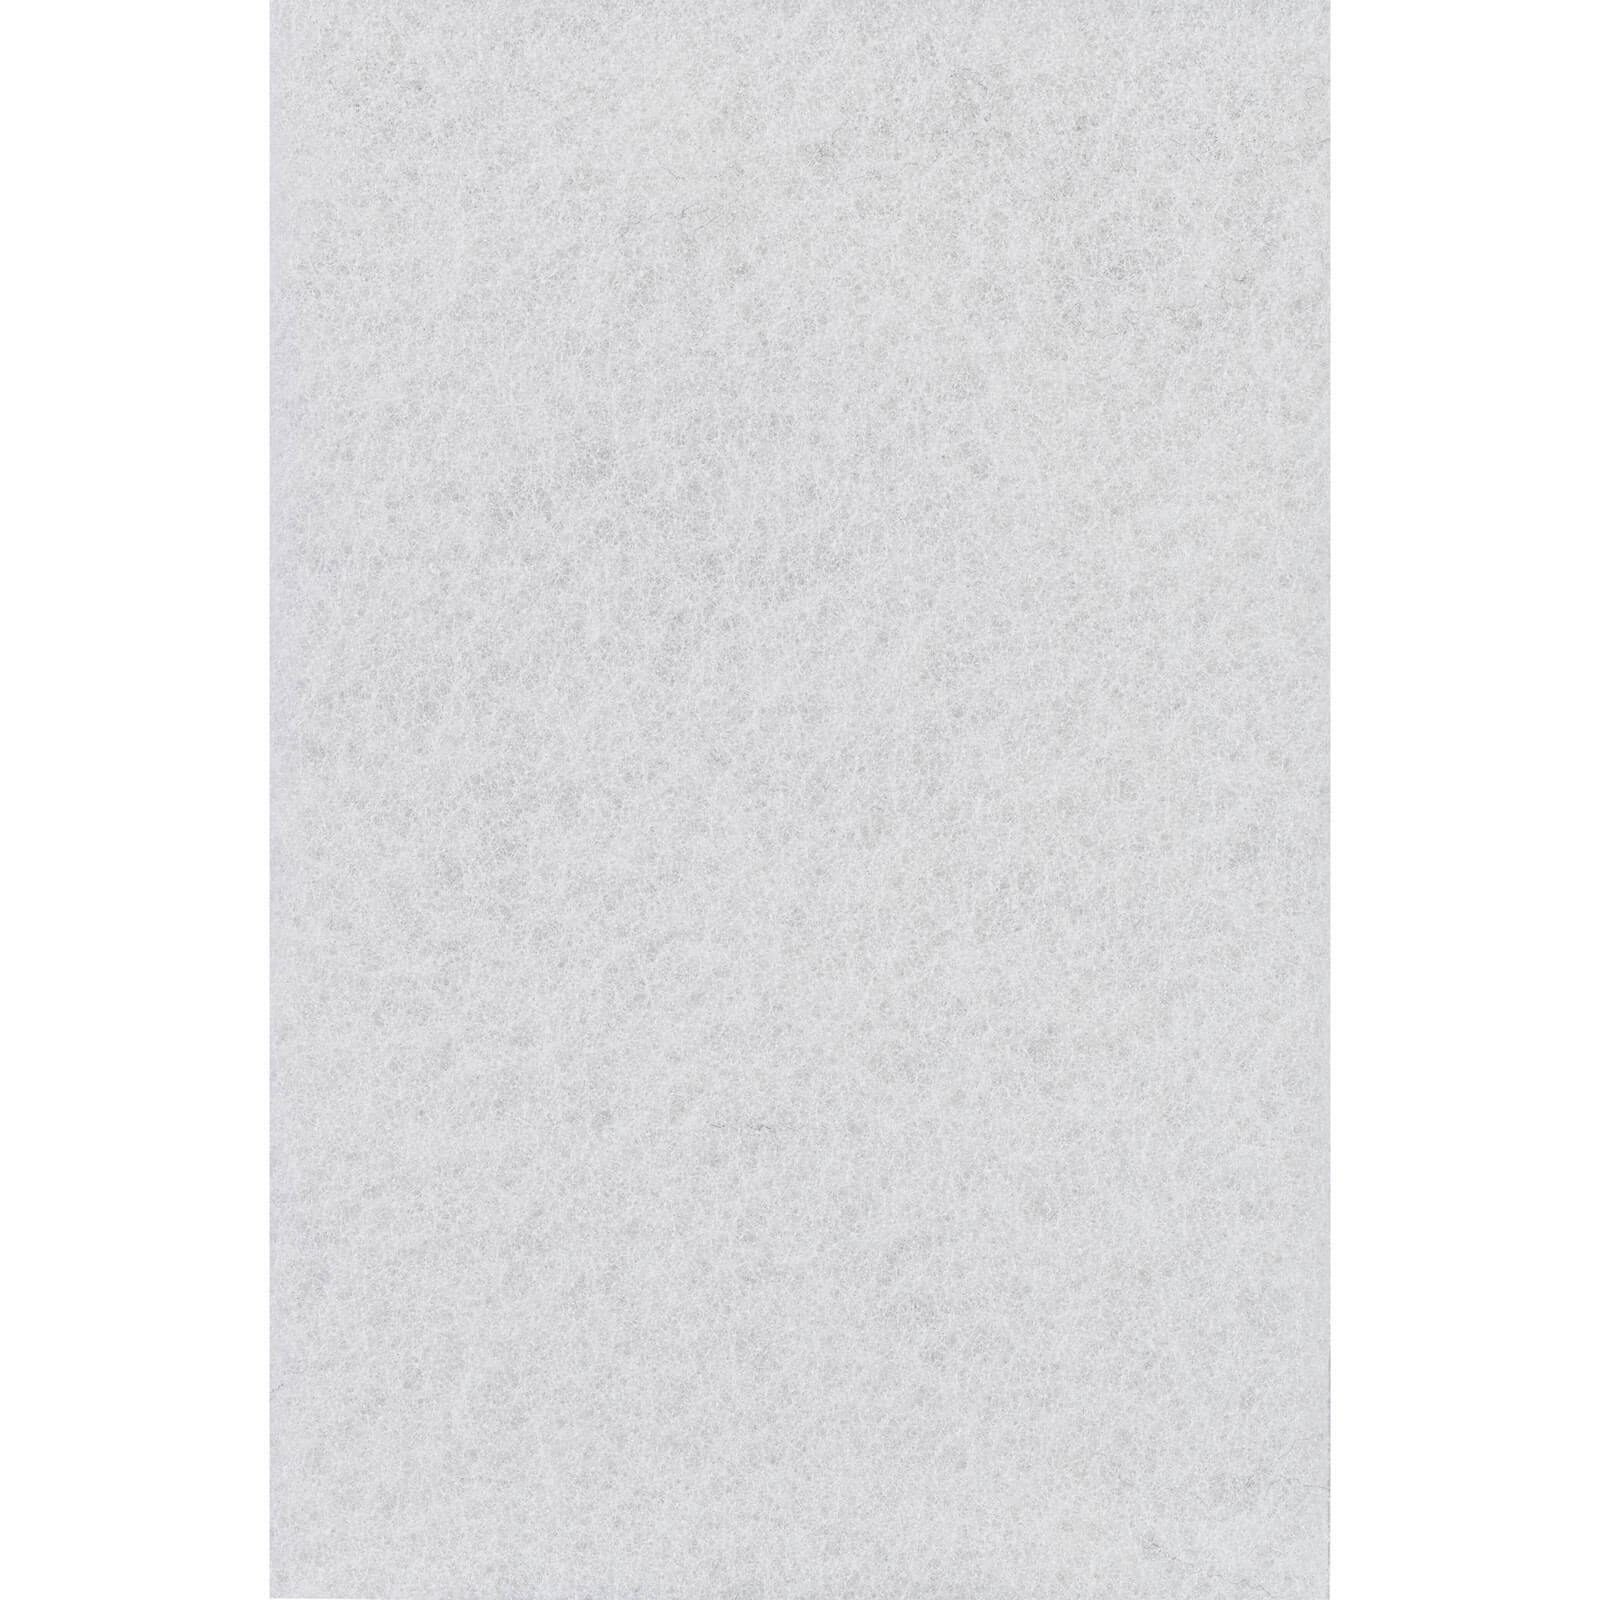 Image of Bosch Fleece Hand Pad Cleaning White Pack of 1